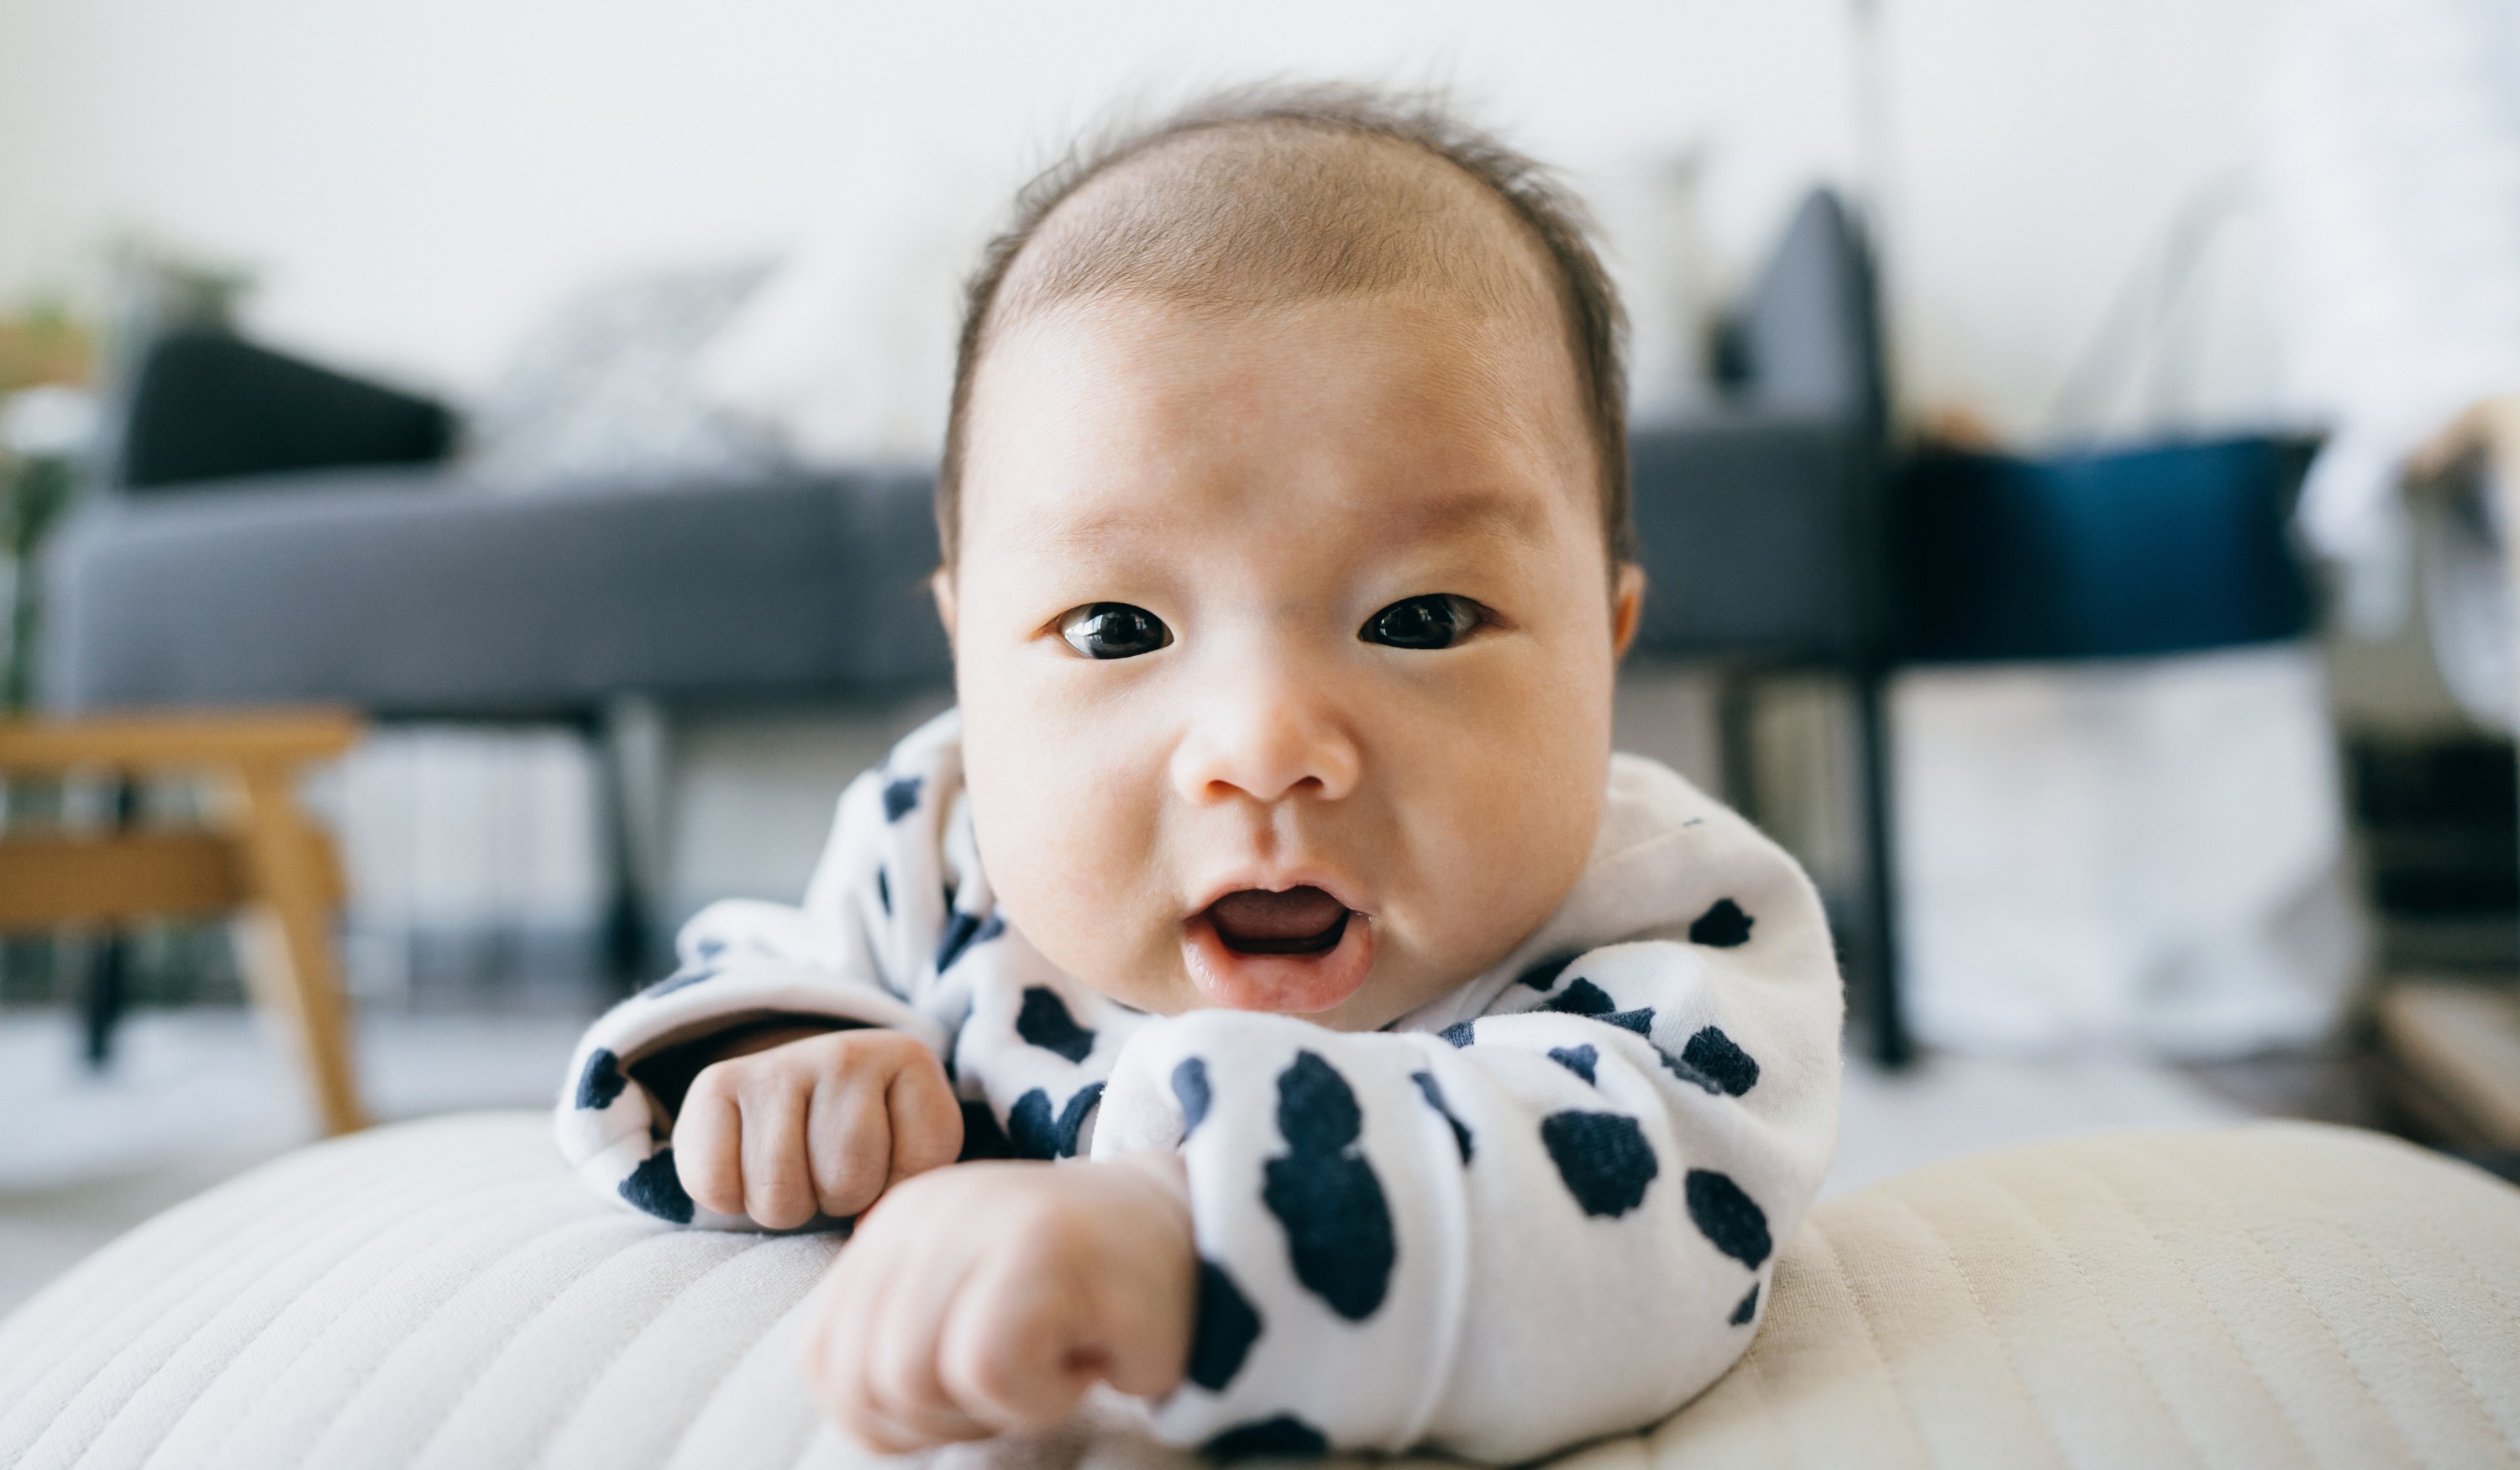 Image of a baby looking at the camera